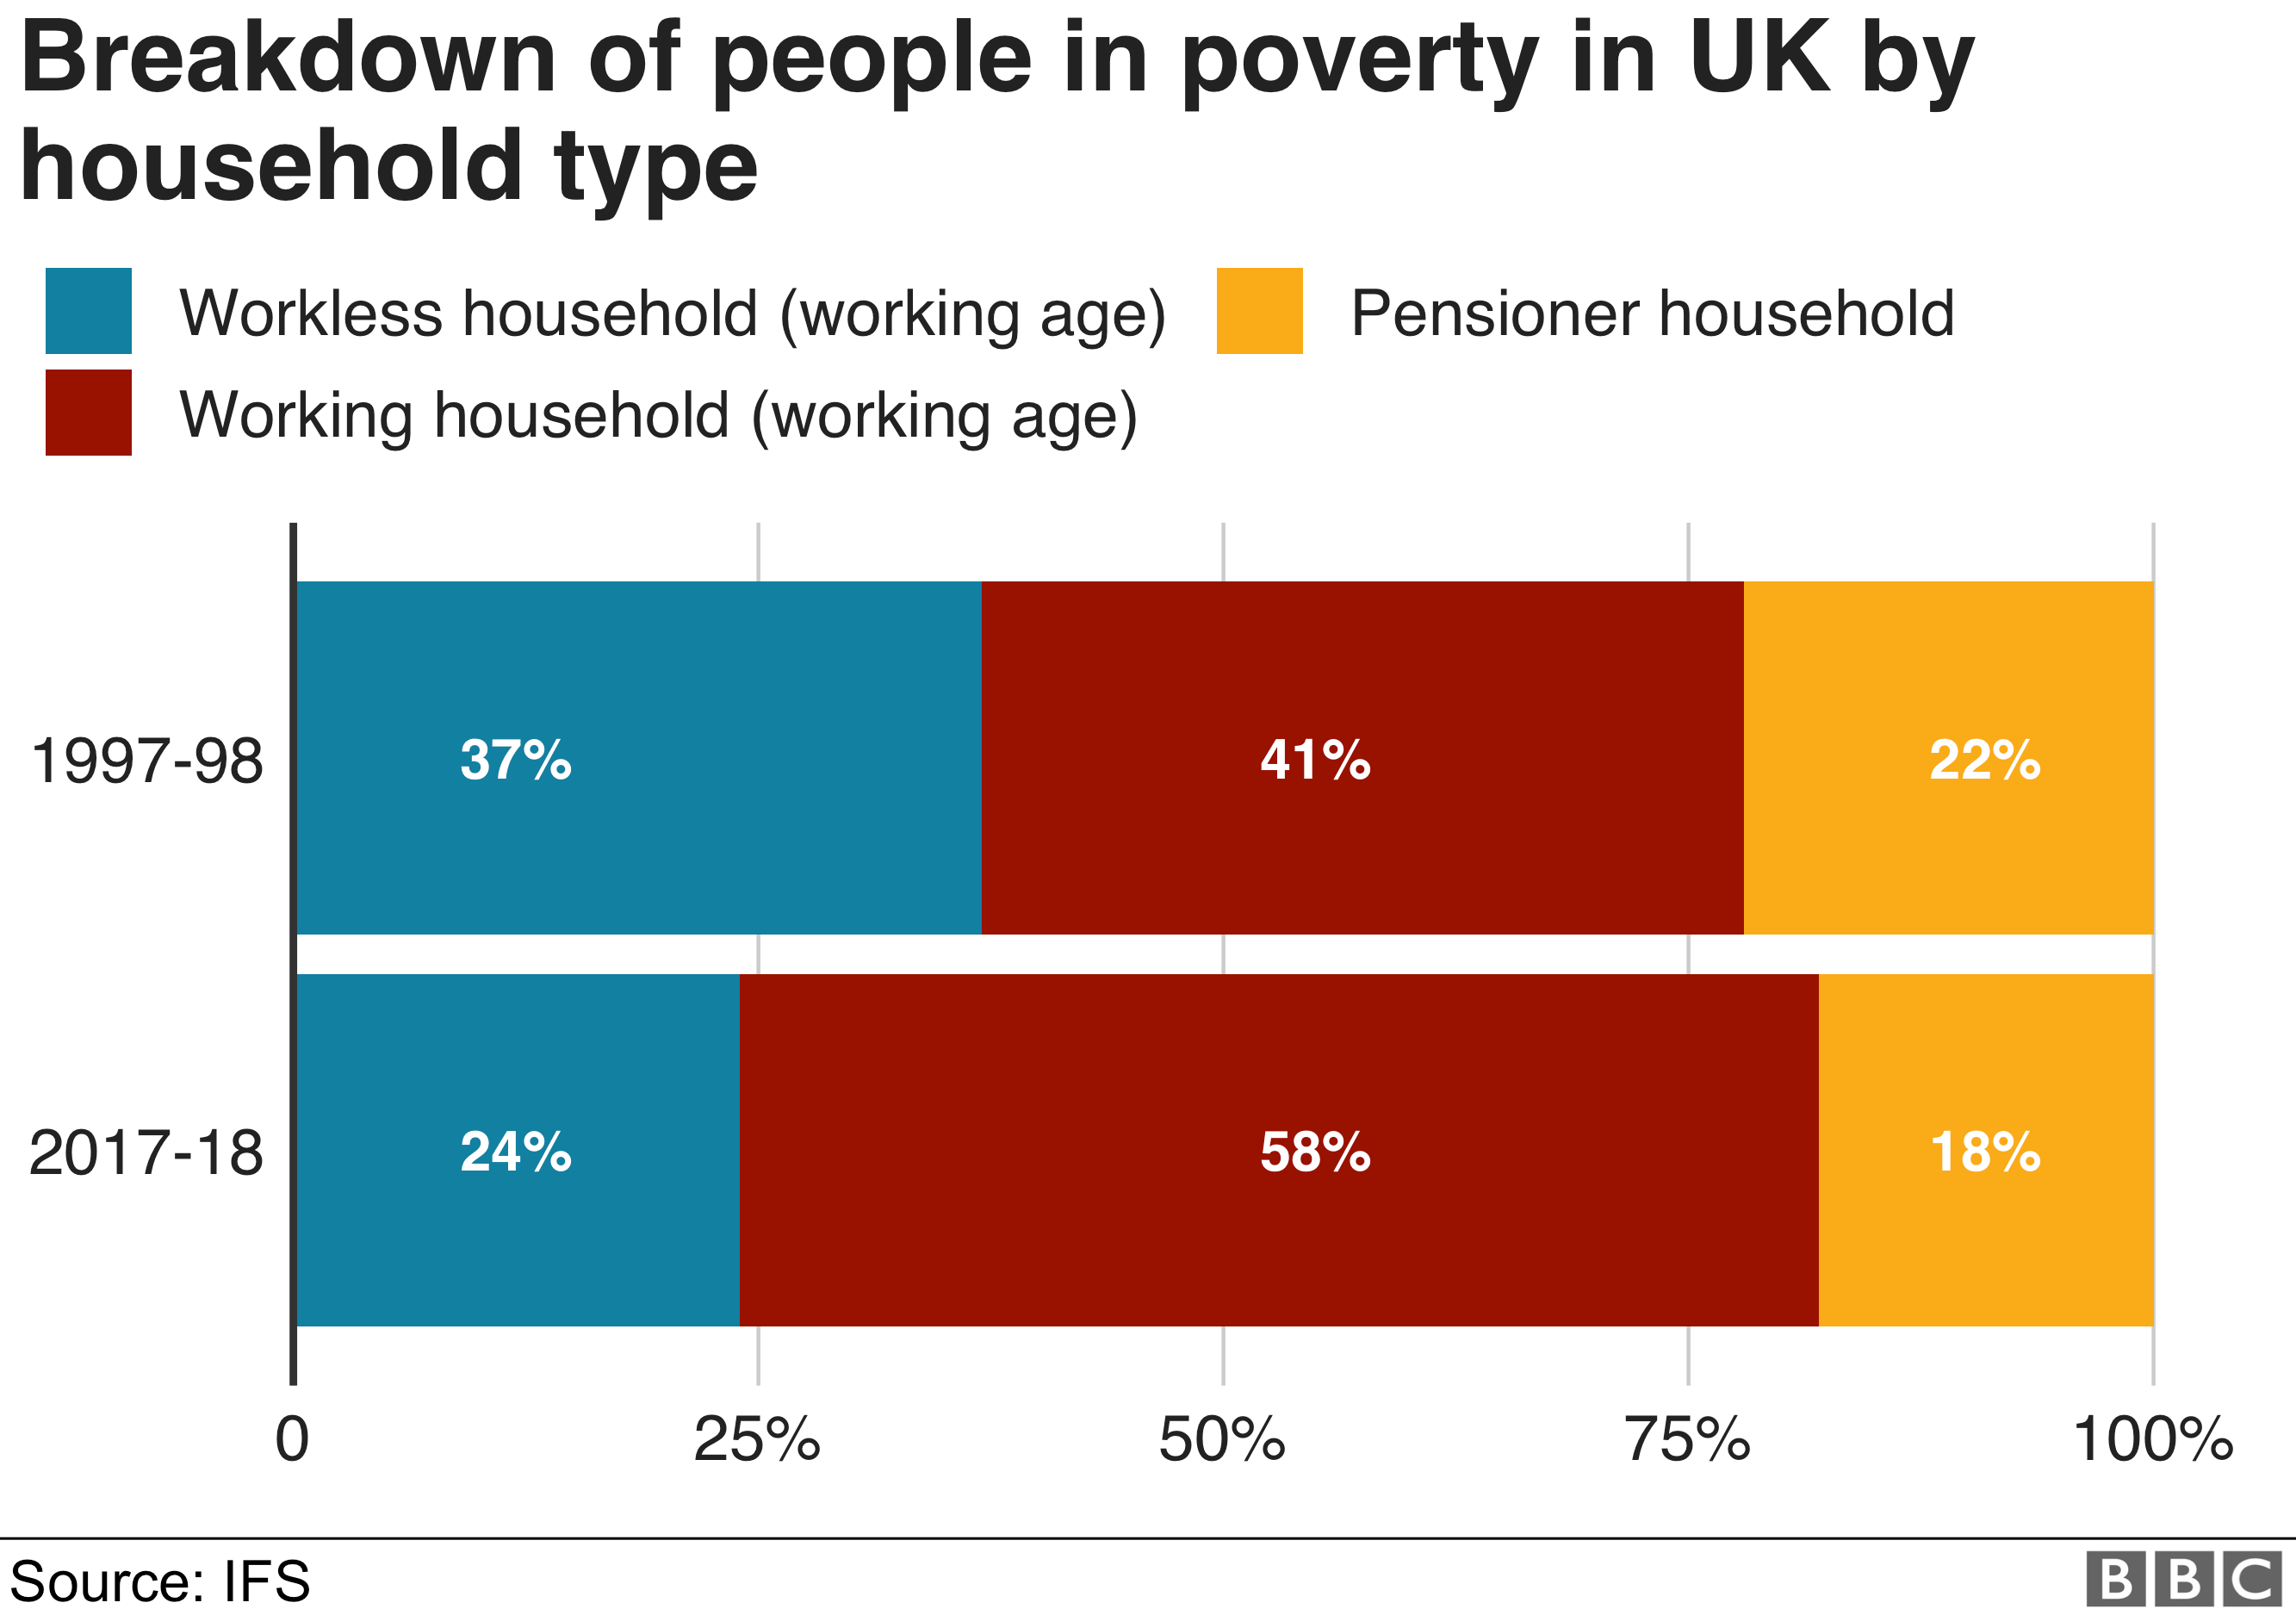 Chart titled: "Breakdown of people in poverty in Great Britain by household type" - shows that the majority of people in poverty (58%) are in work, as opposed to unemployed or pensioners